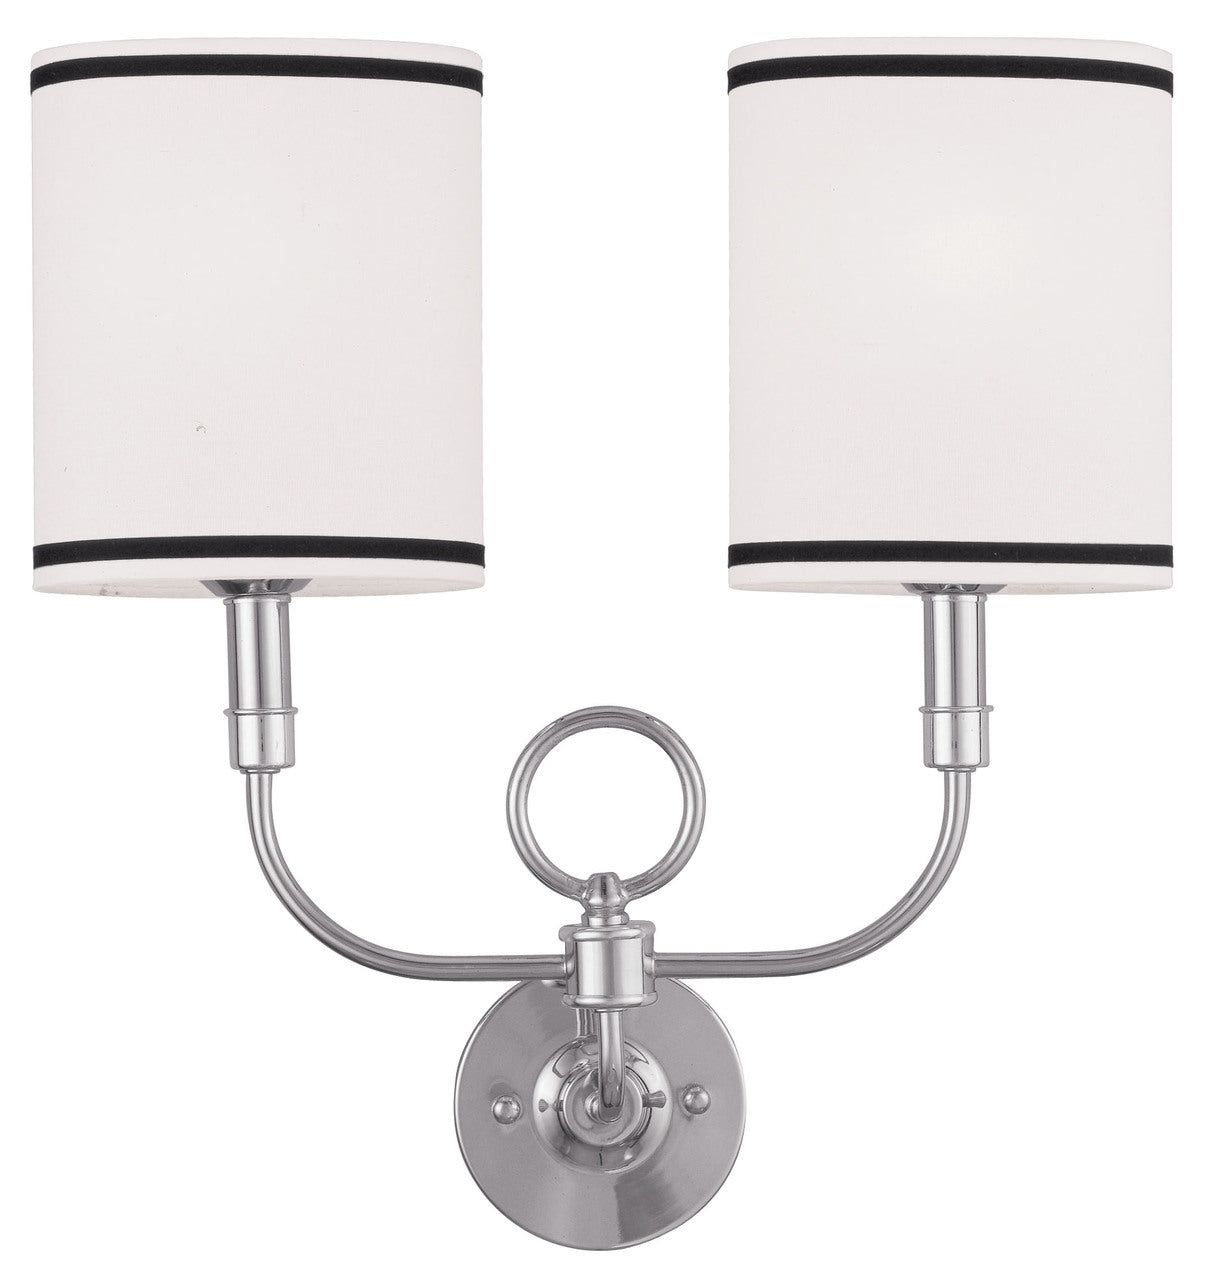 LIVEX Lighting 9122-91 Wall Sconce in Brushed Nickel (2 Light)